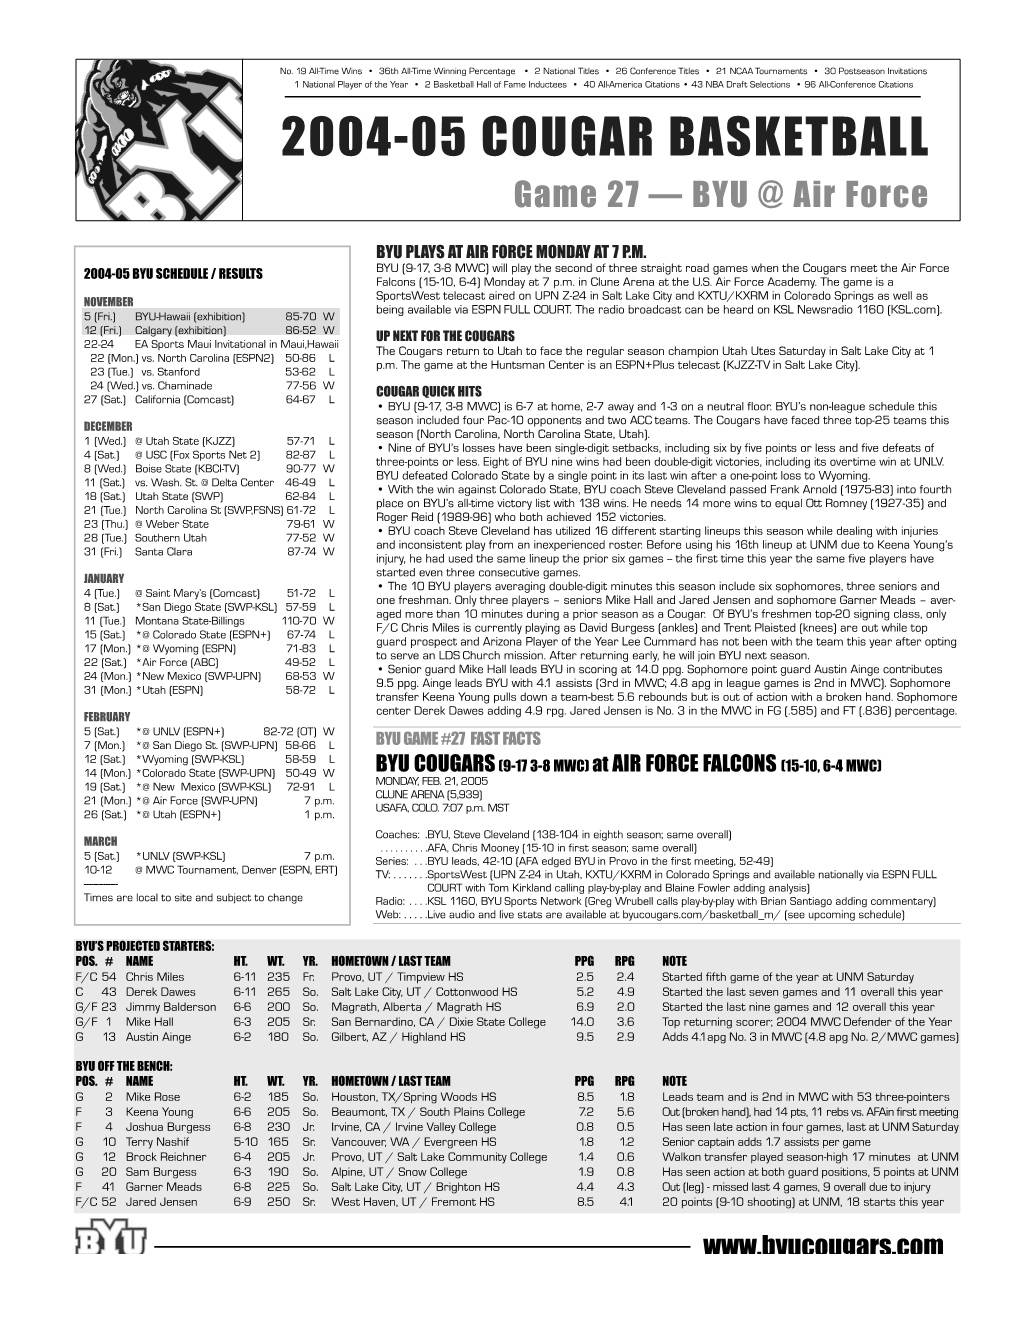 Print 04 MBKB Notes (Cleve's)